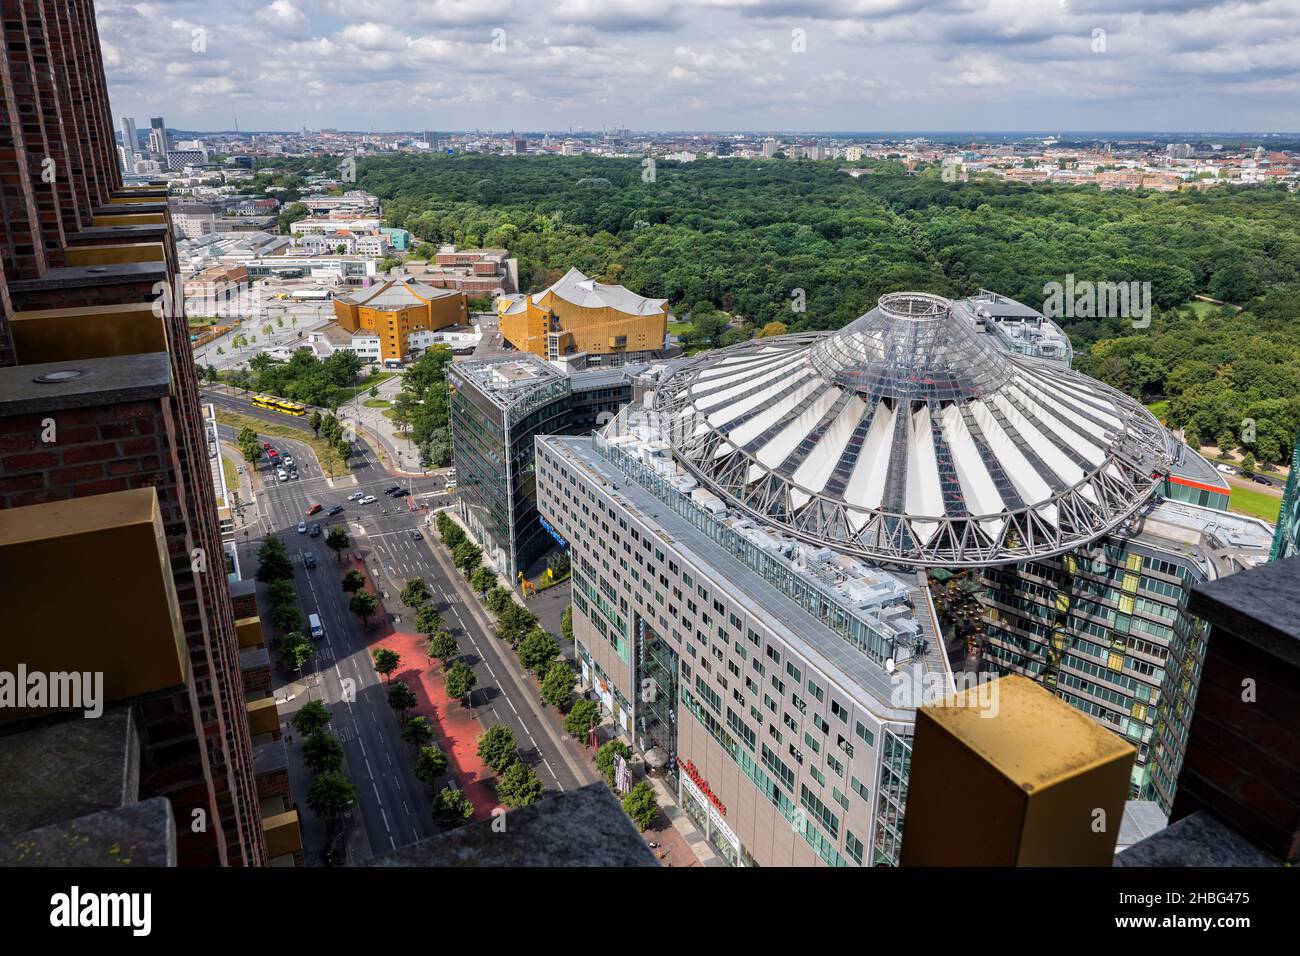 City of Berlin in Germany, cityscape with view above Sony Center complex at e Potsdamer Platz and Tiergarten park. Stock Photo